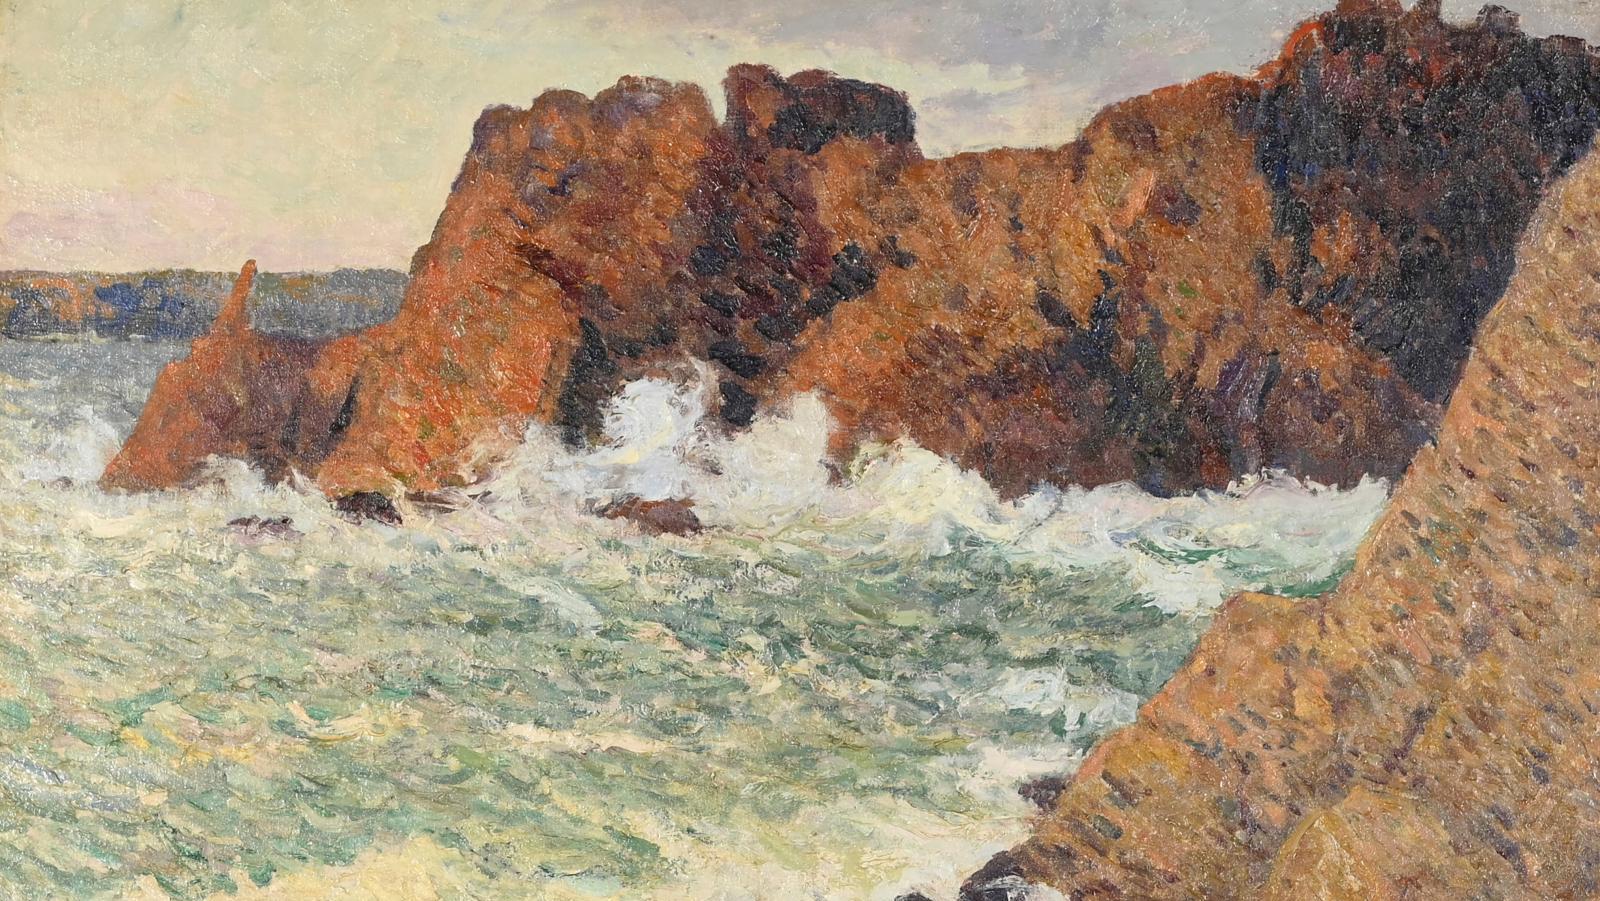 Maxime Maufra (1861-1918), Côte rocheuse, Morgat (Rocky Coast, Morgat), oil on canvas,... Maxime Maufra: A Painter and The Sea